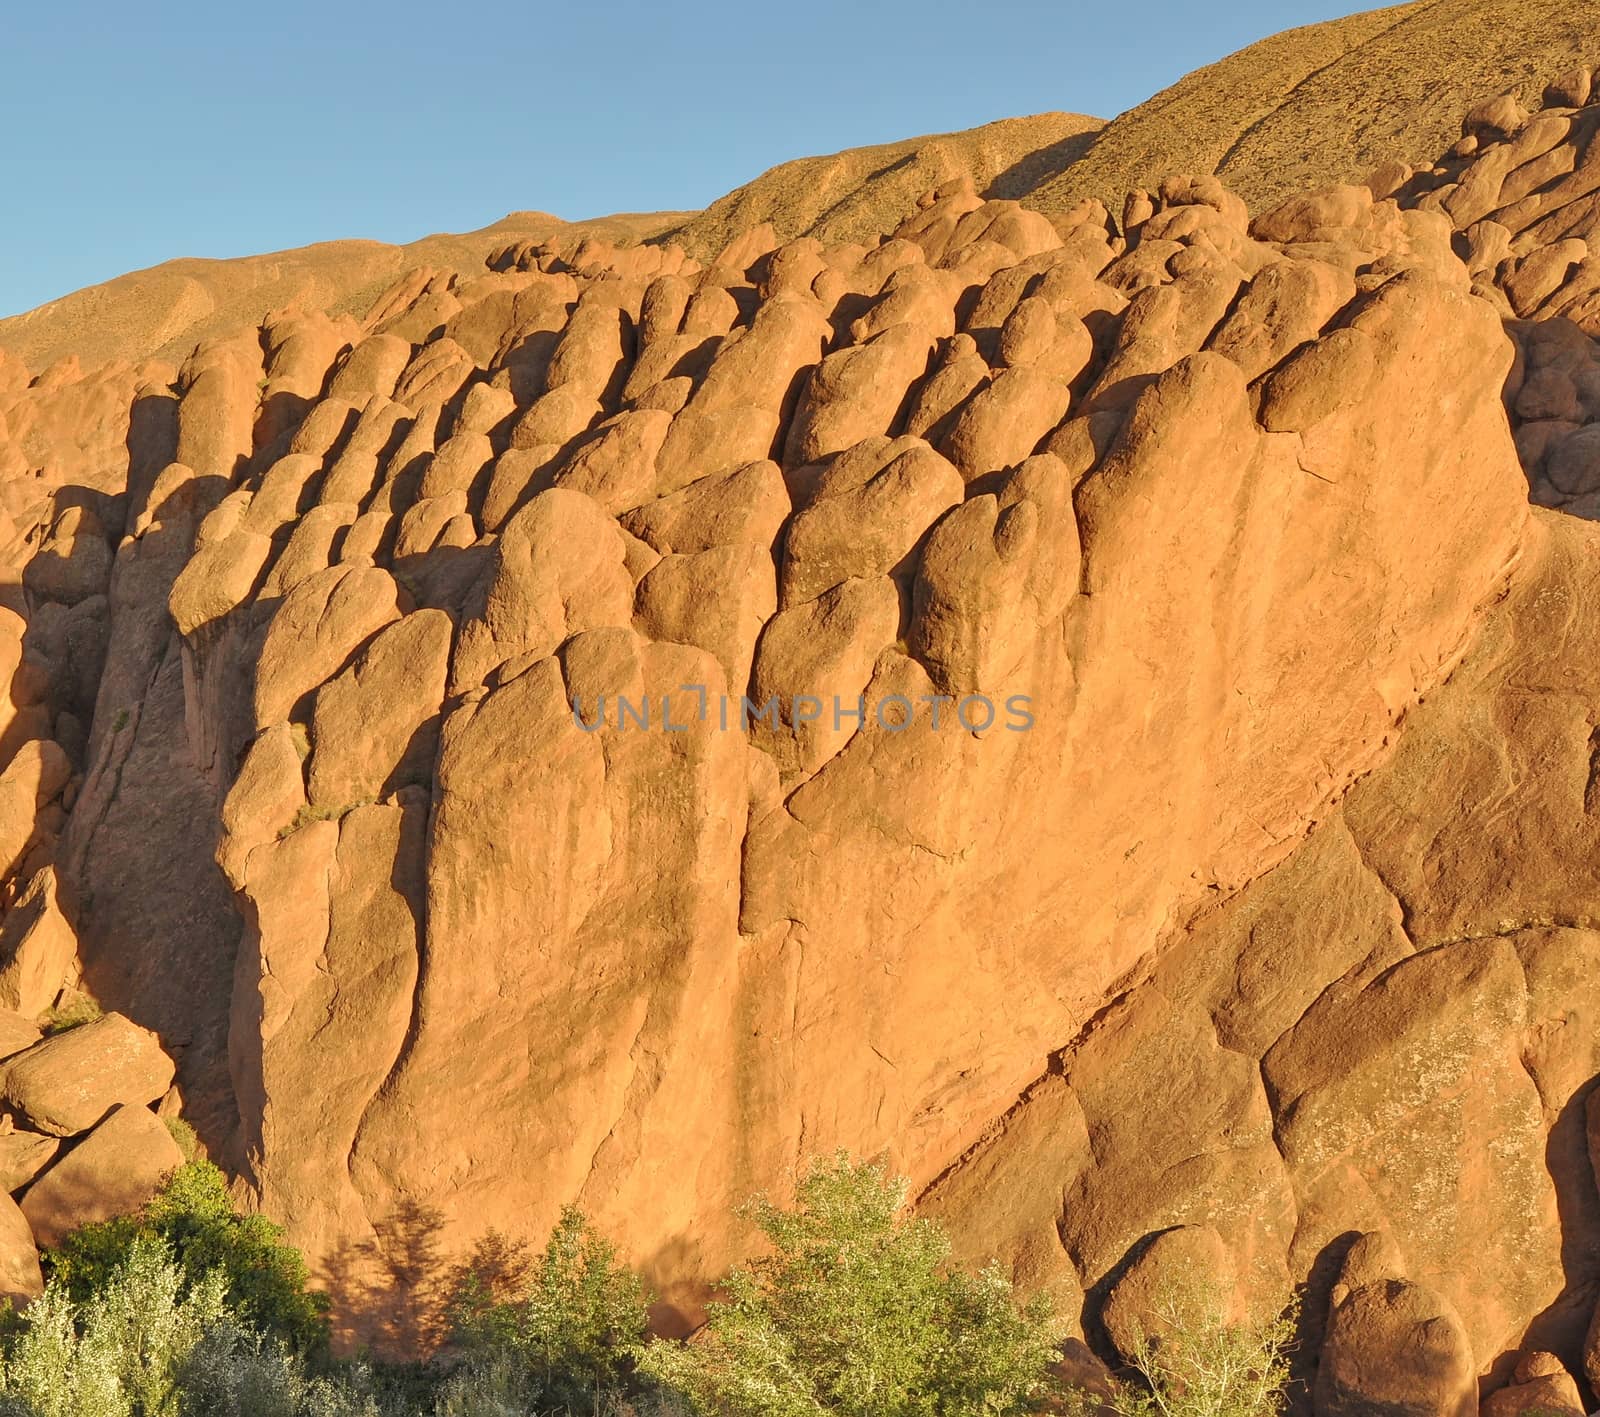 Strange rock formations in Dades Gorge, Morocco, Africa by anderm